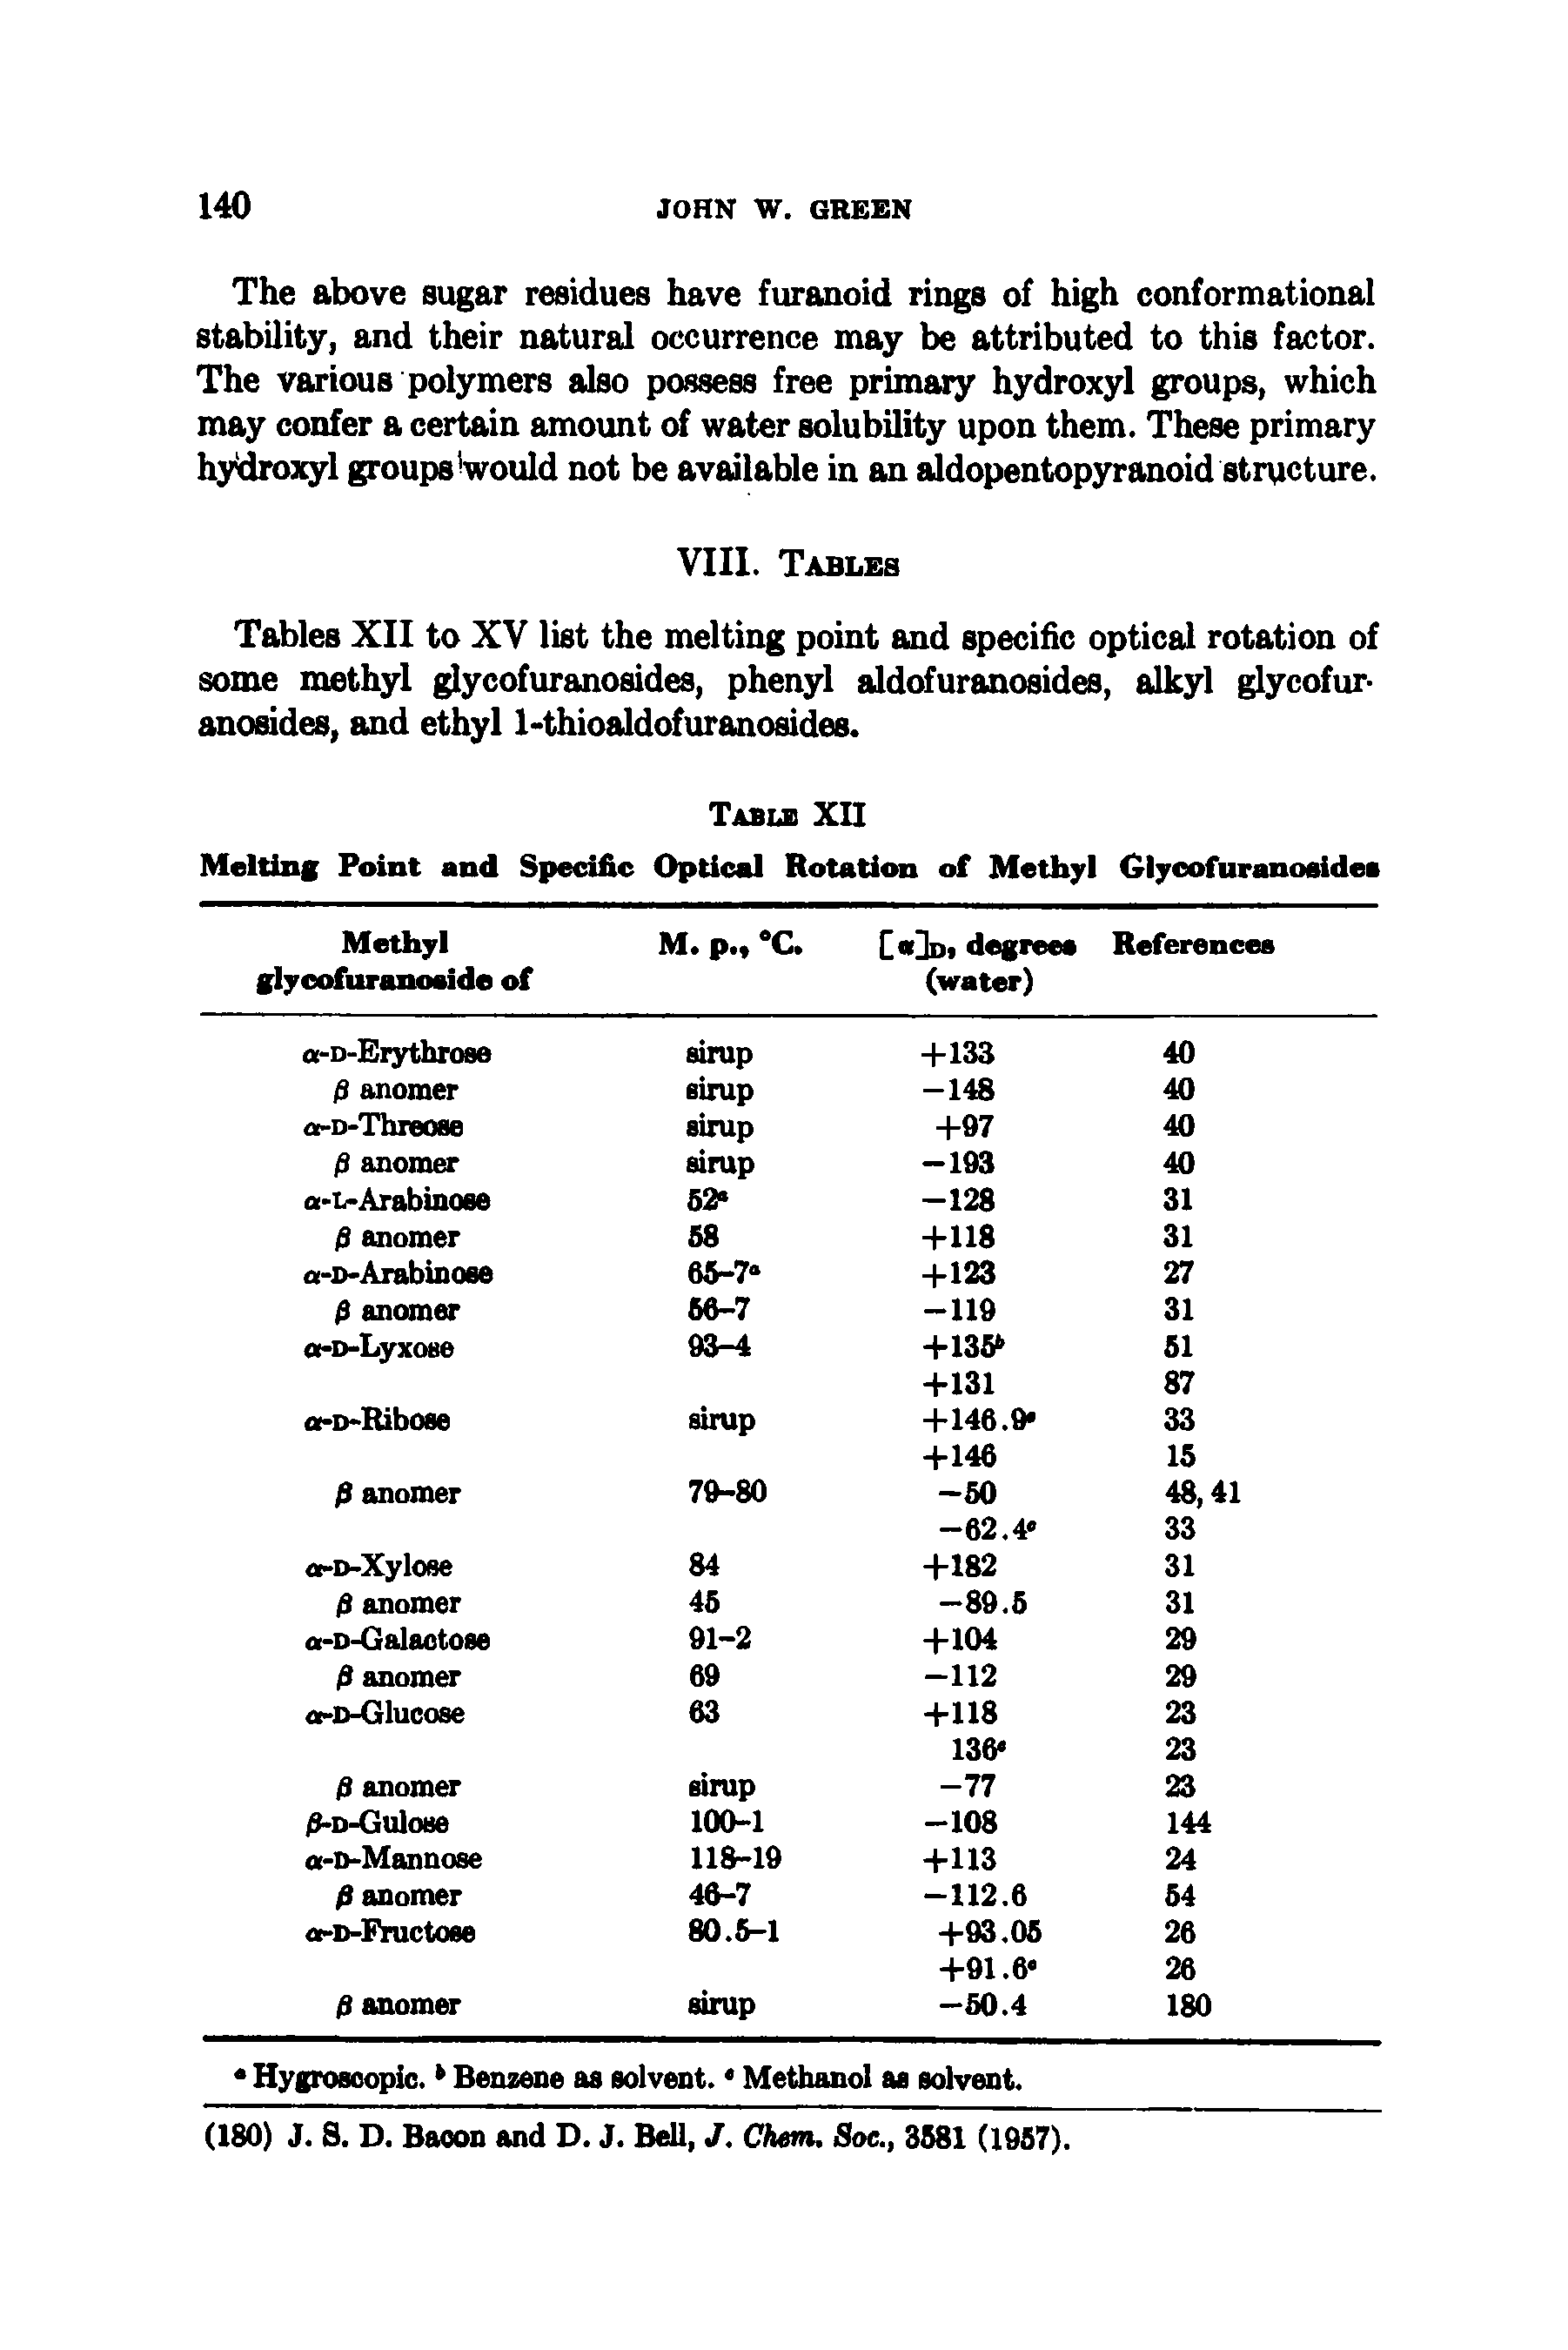 Tables XII to XV list the melting point and specific optical rotation of some methyl glycofuranosides, phenyl aldofuranosides, alkyl glycofur-anosides, and ethyl l-thioaldofuranosides.